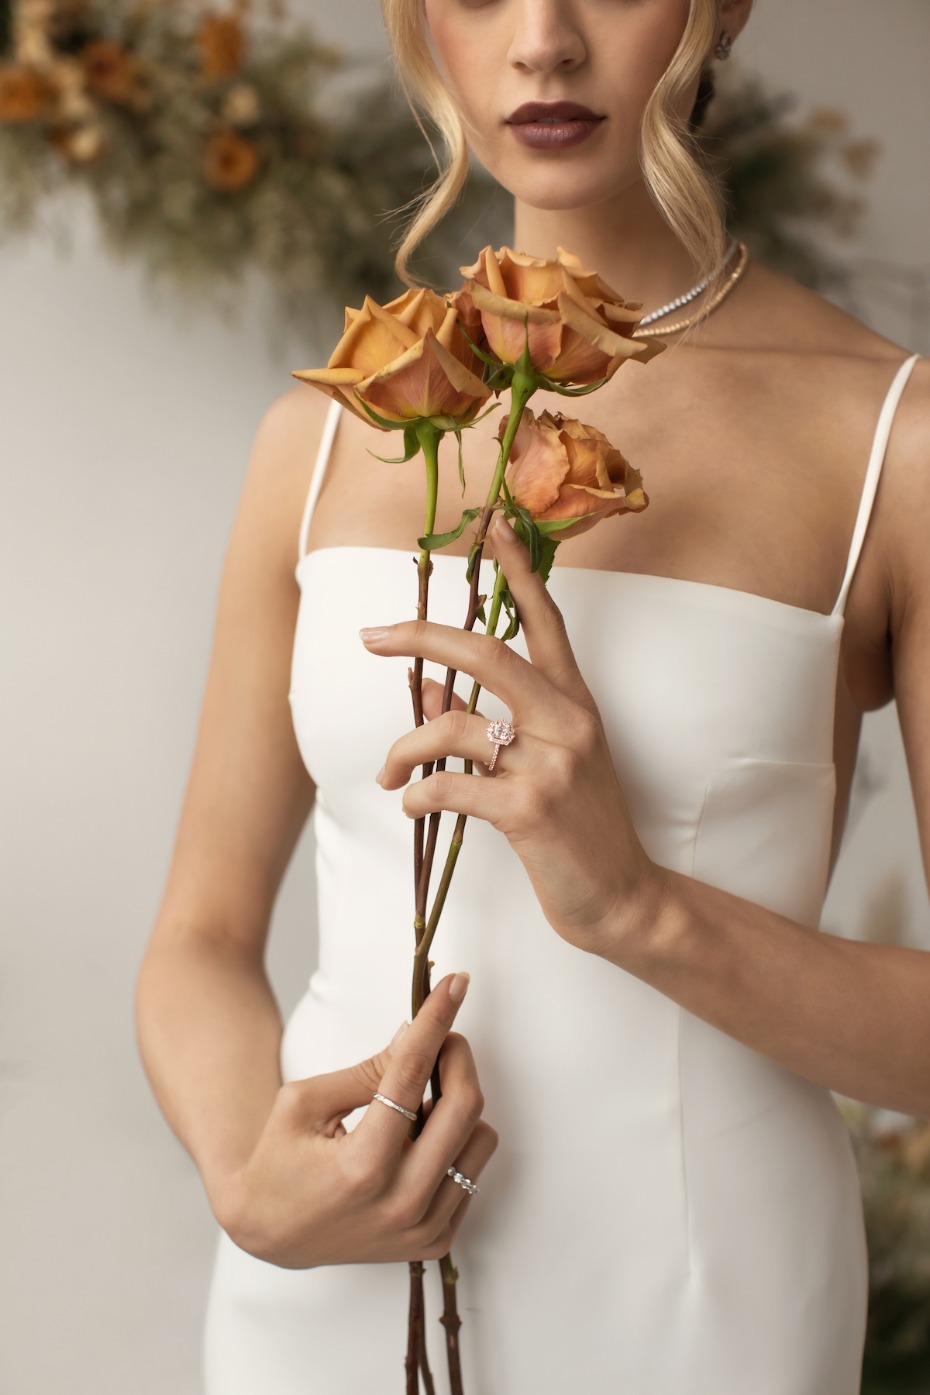 How to Make Sure Your Wedding Day Jewelry Doesnât Become An Afterthought